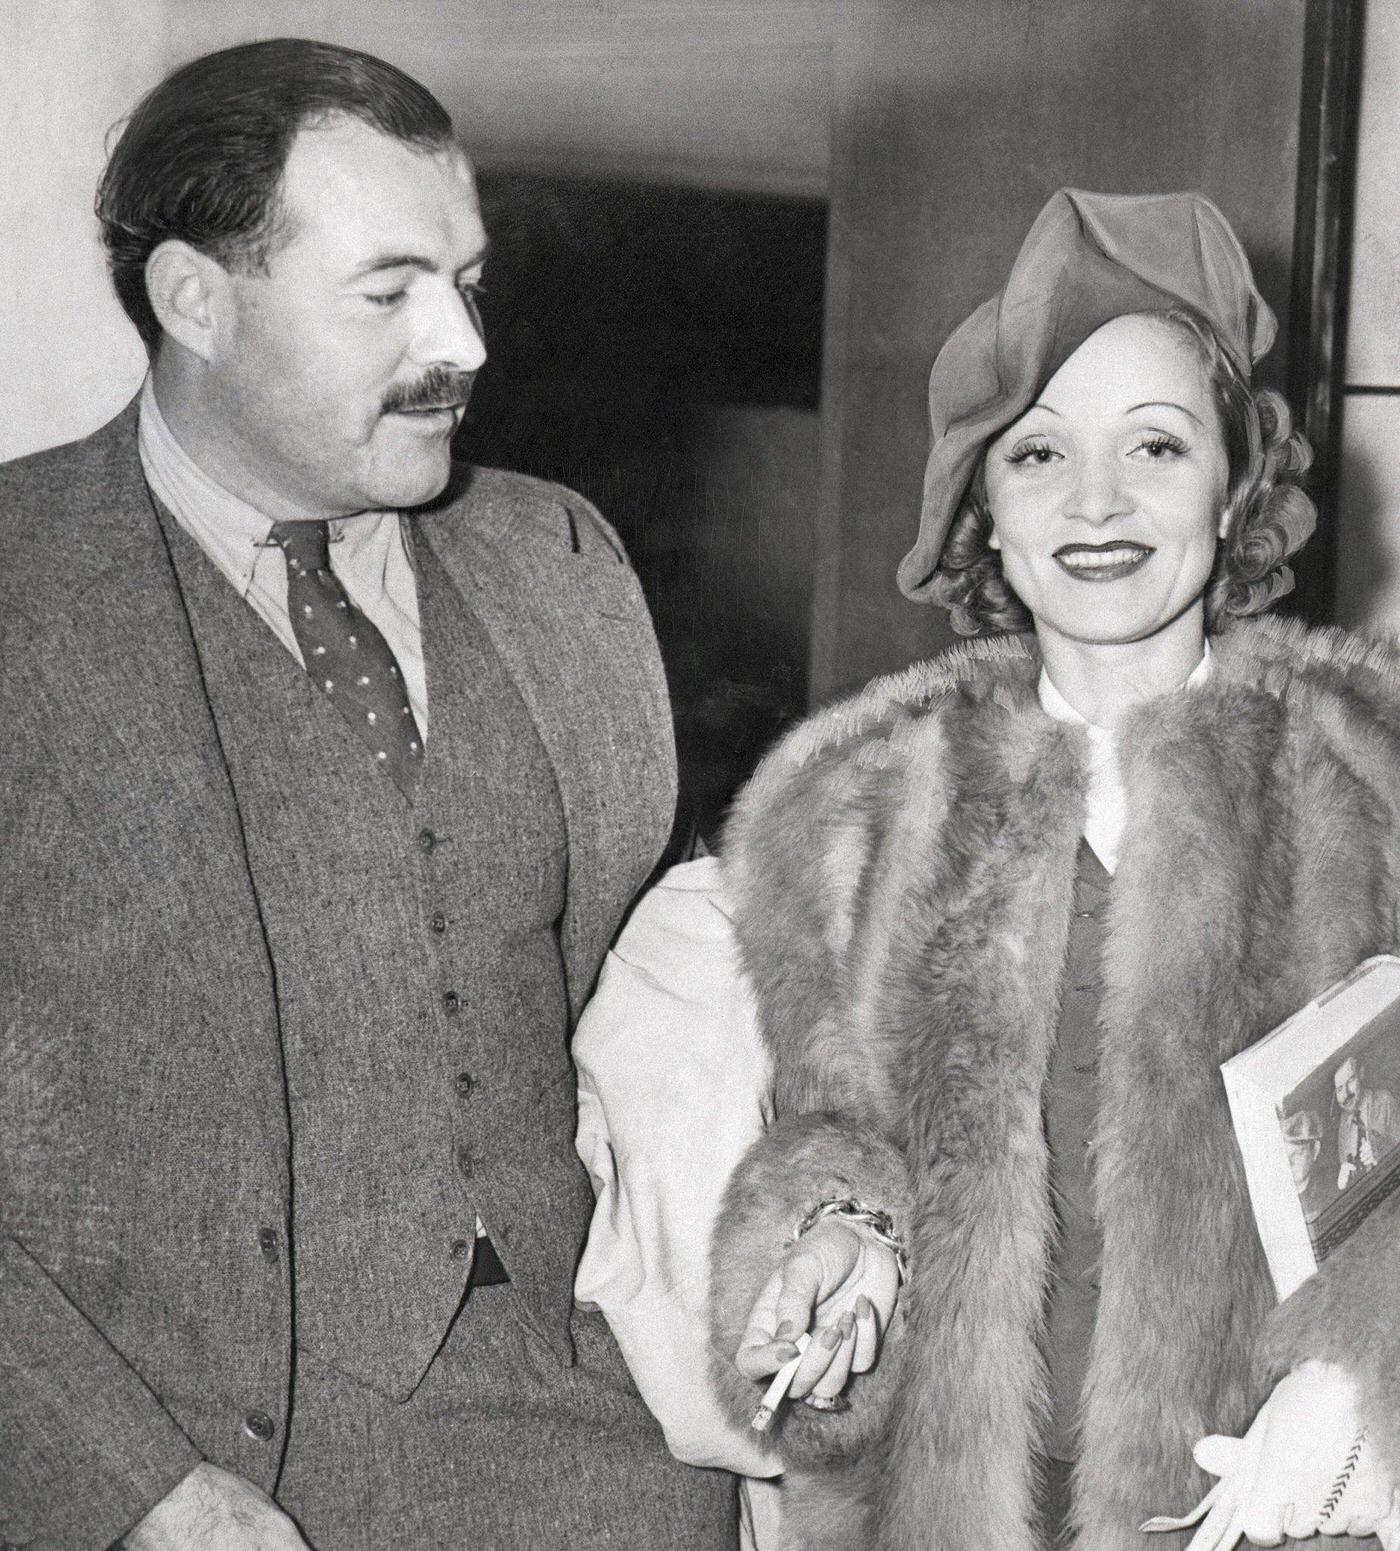 Ernest Hemingway and Marlene Dietrich captured in a photograph together.